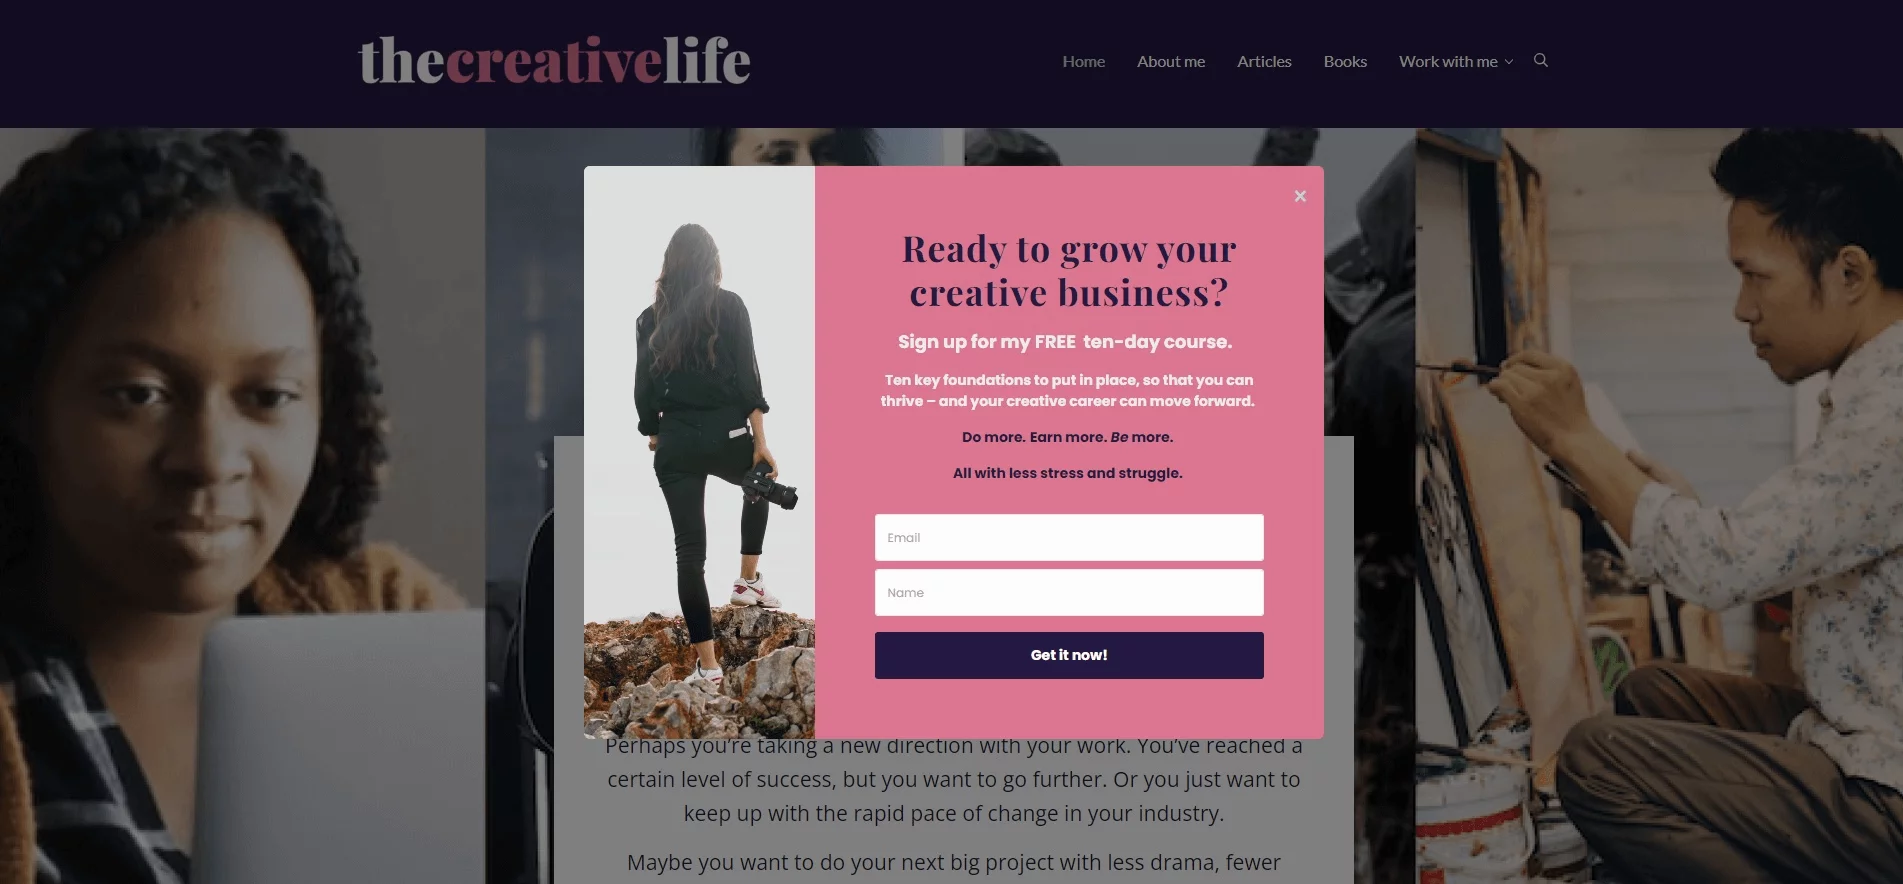 Popup on The Creative Life offering a free ten-day course to grow a creative business, with an email signup form.